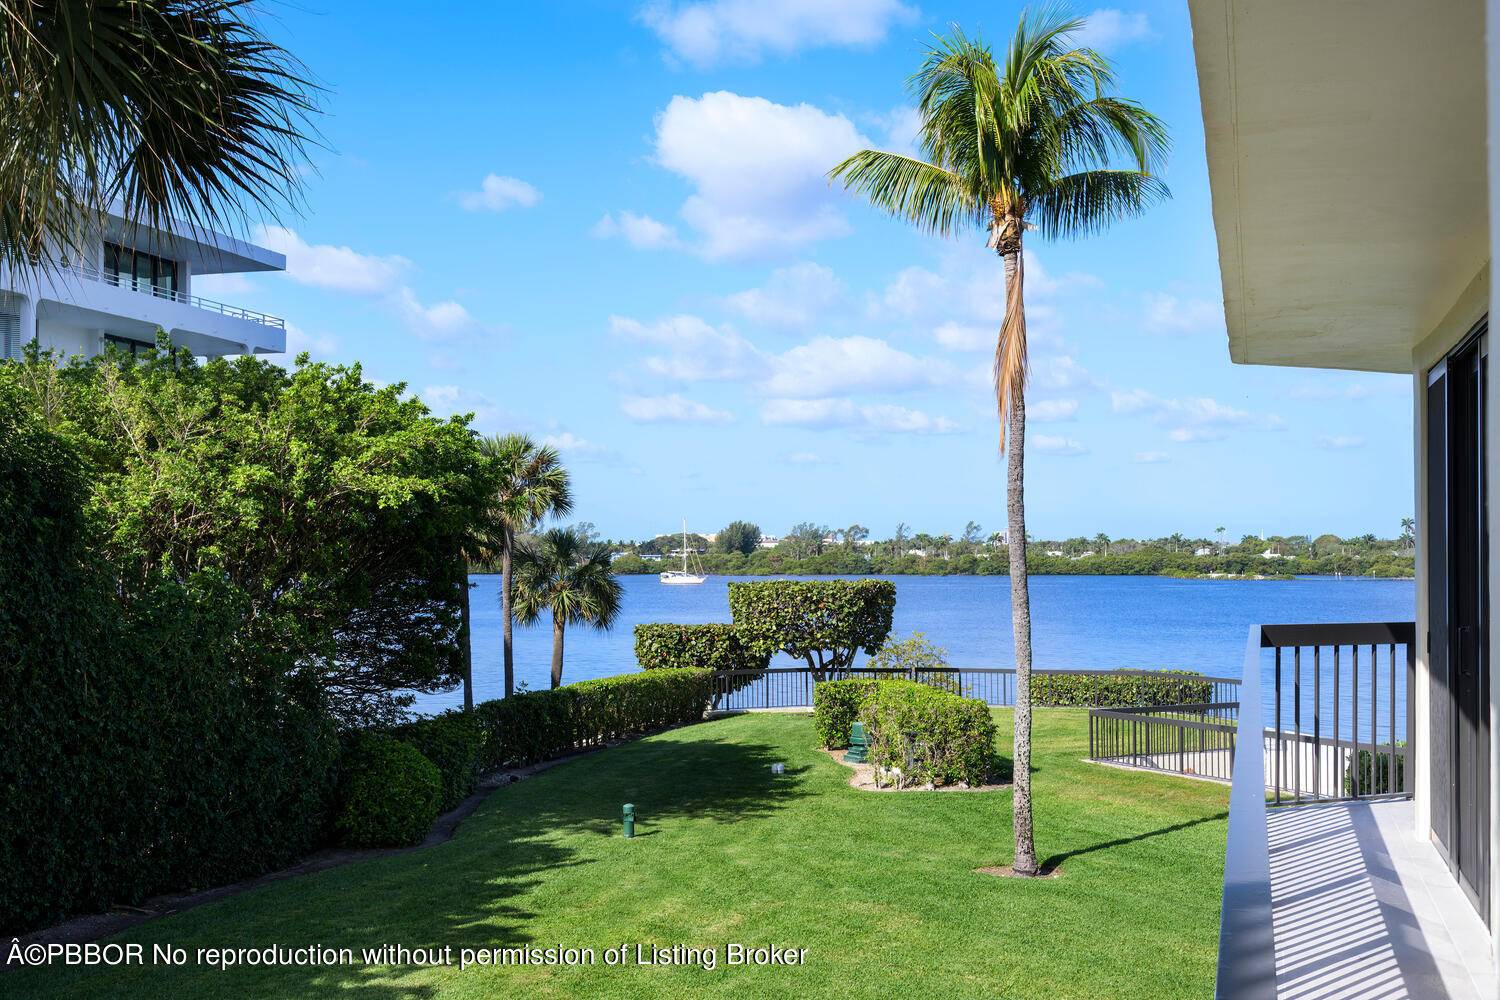 Sutton Place, with its stunning architectural and interior features, and beach access is renowned as the most coveted intracoastal building in Palm Beach with garage parking.